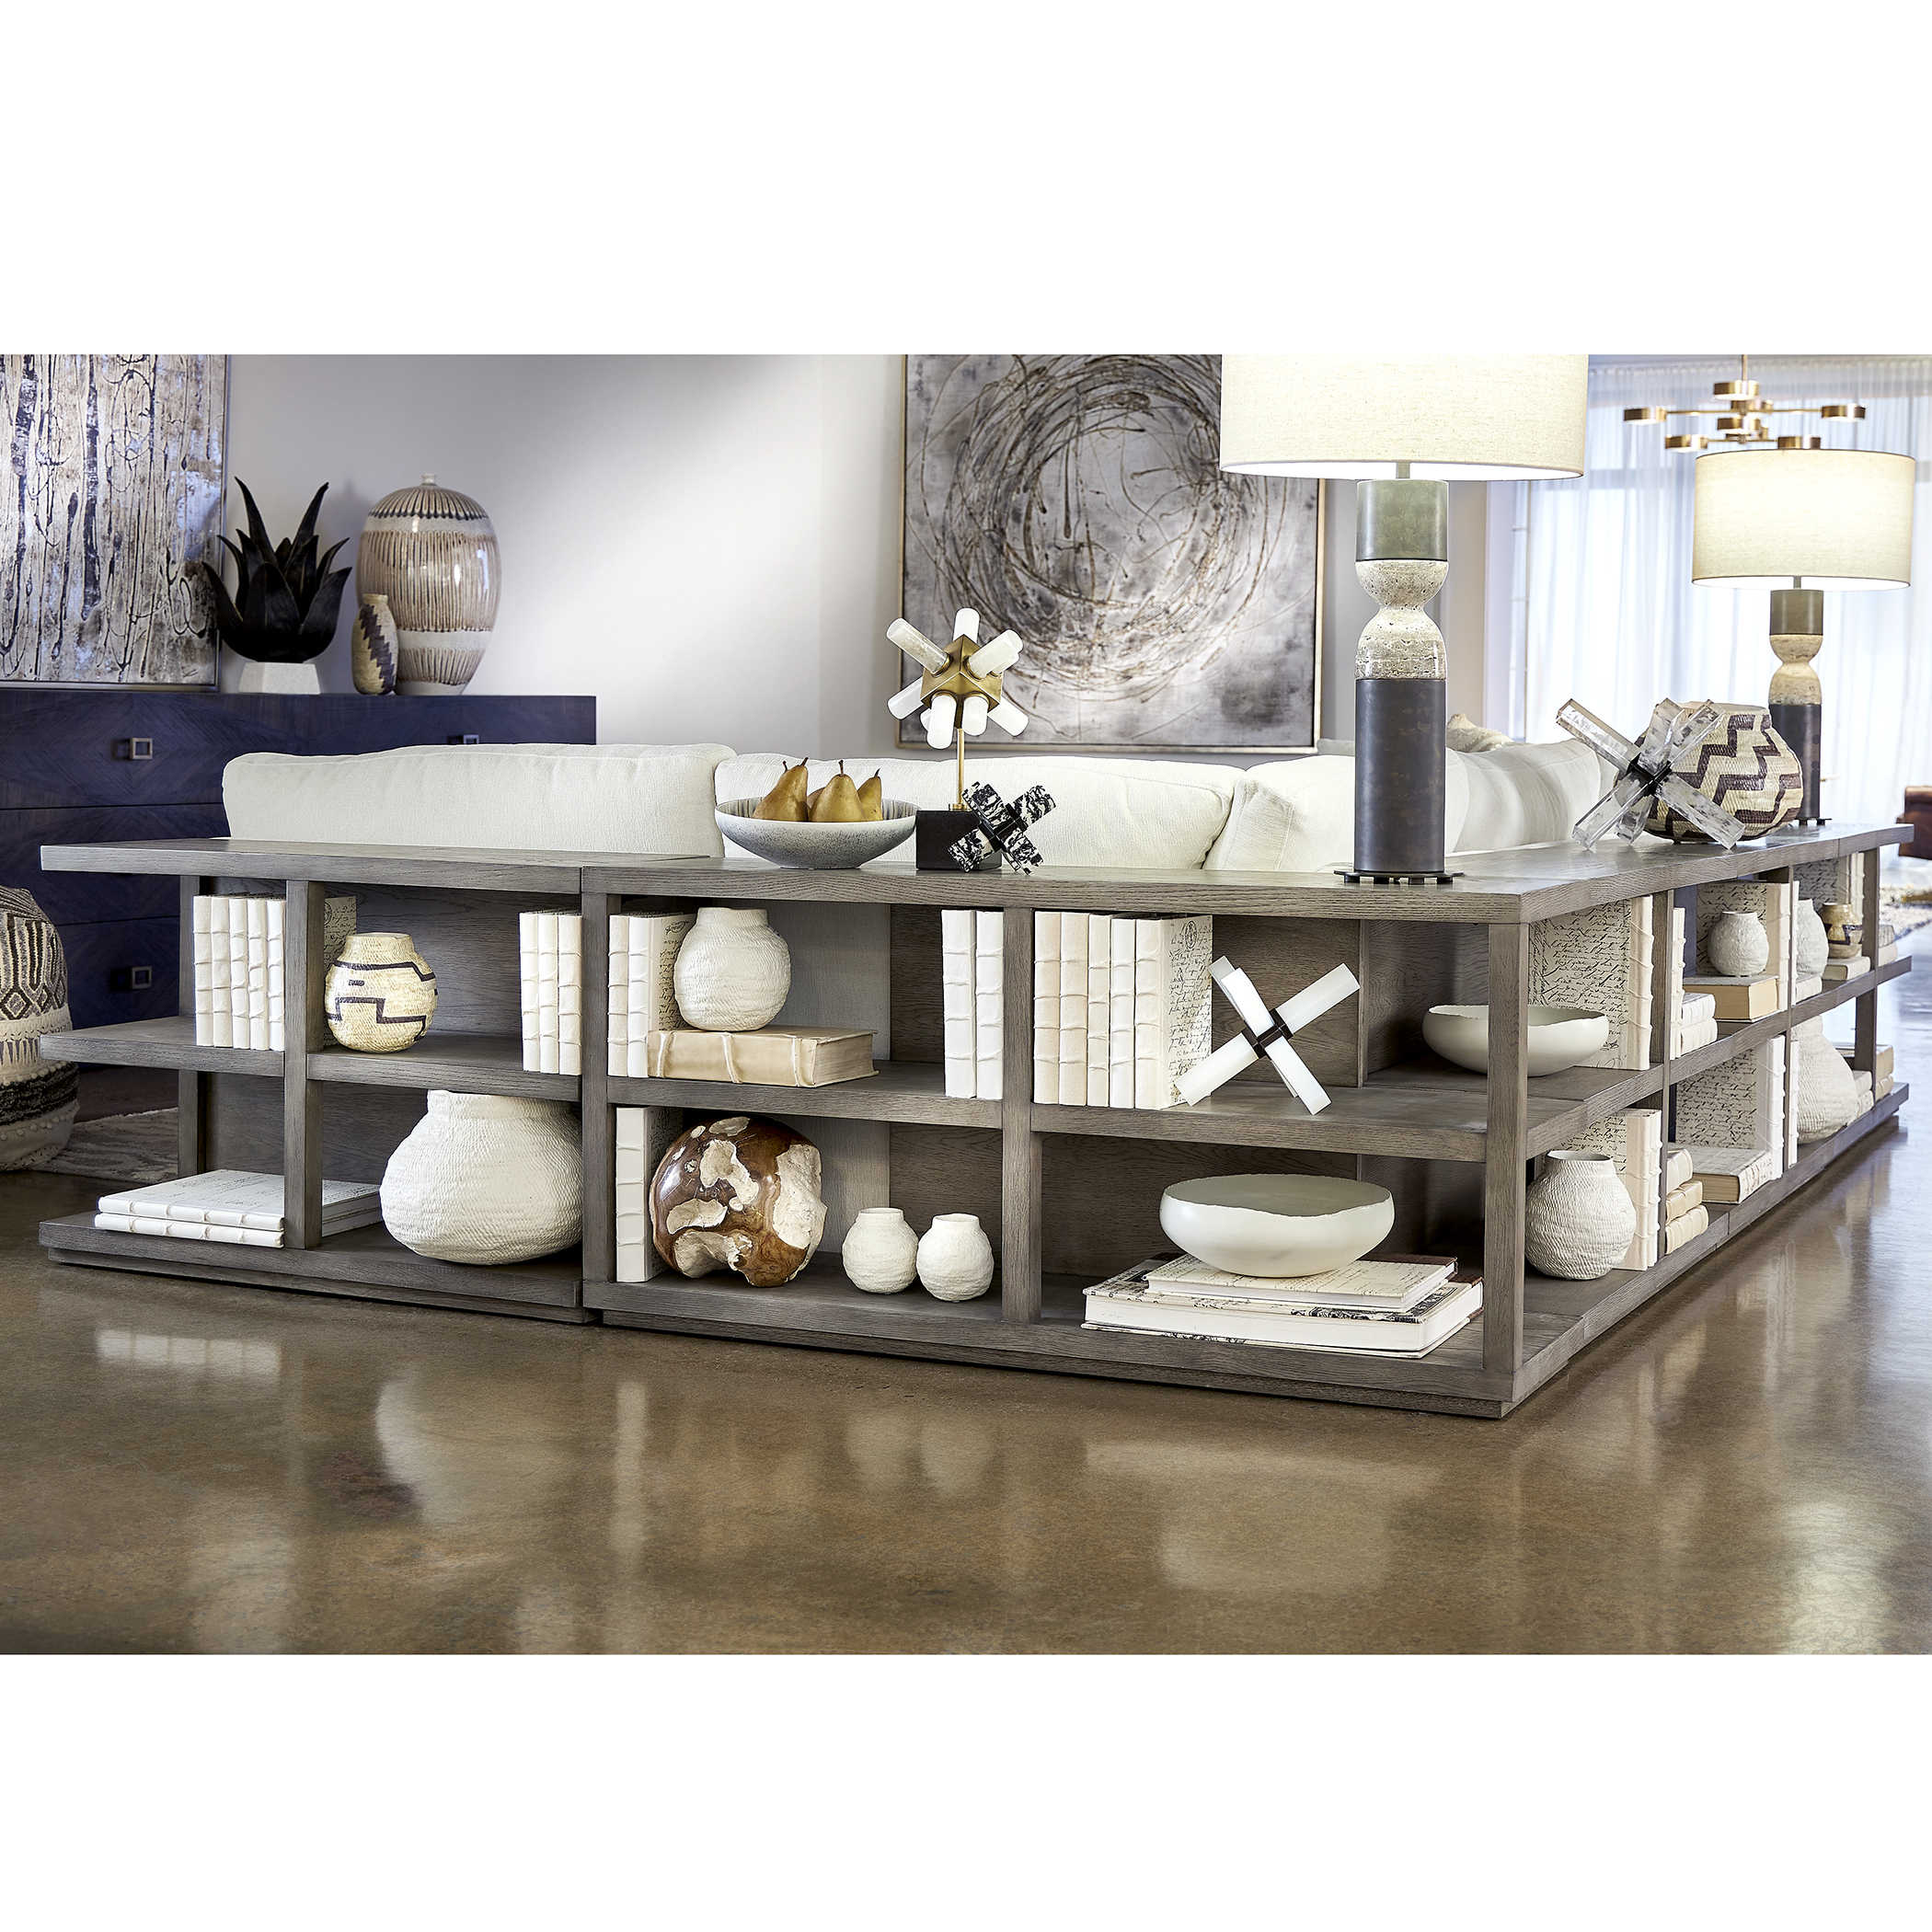 https://www.uttermost.com/49054a/globalassets/product-images/r24961.jpg